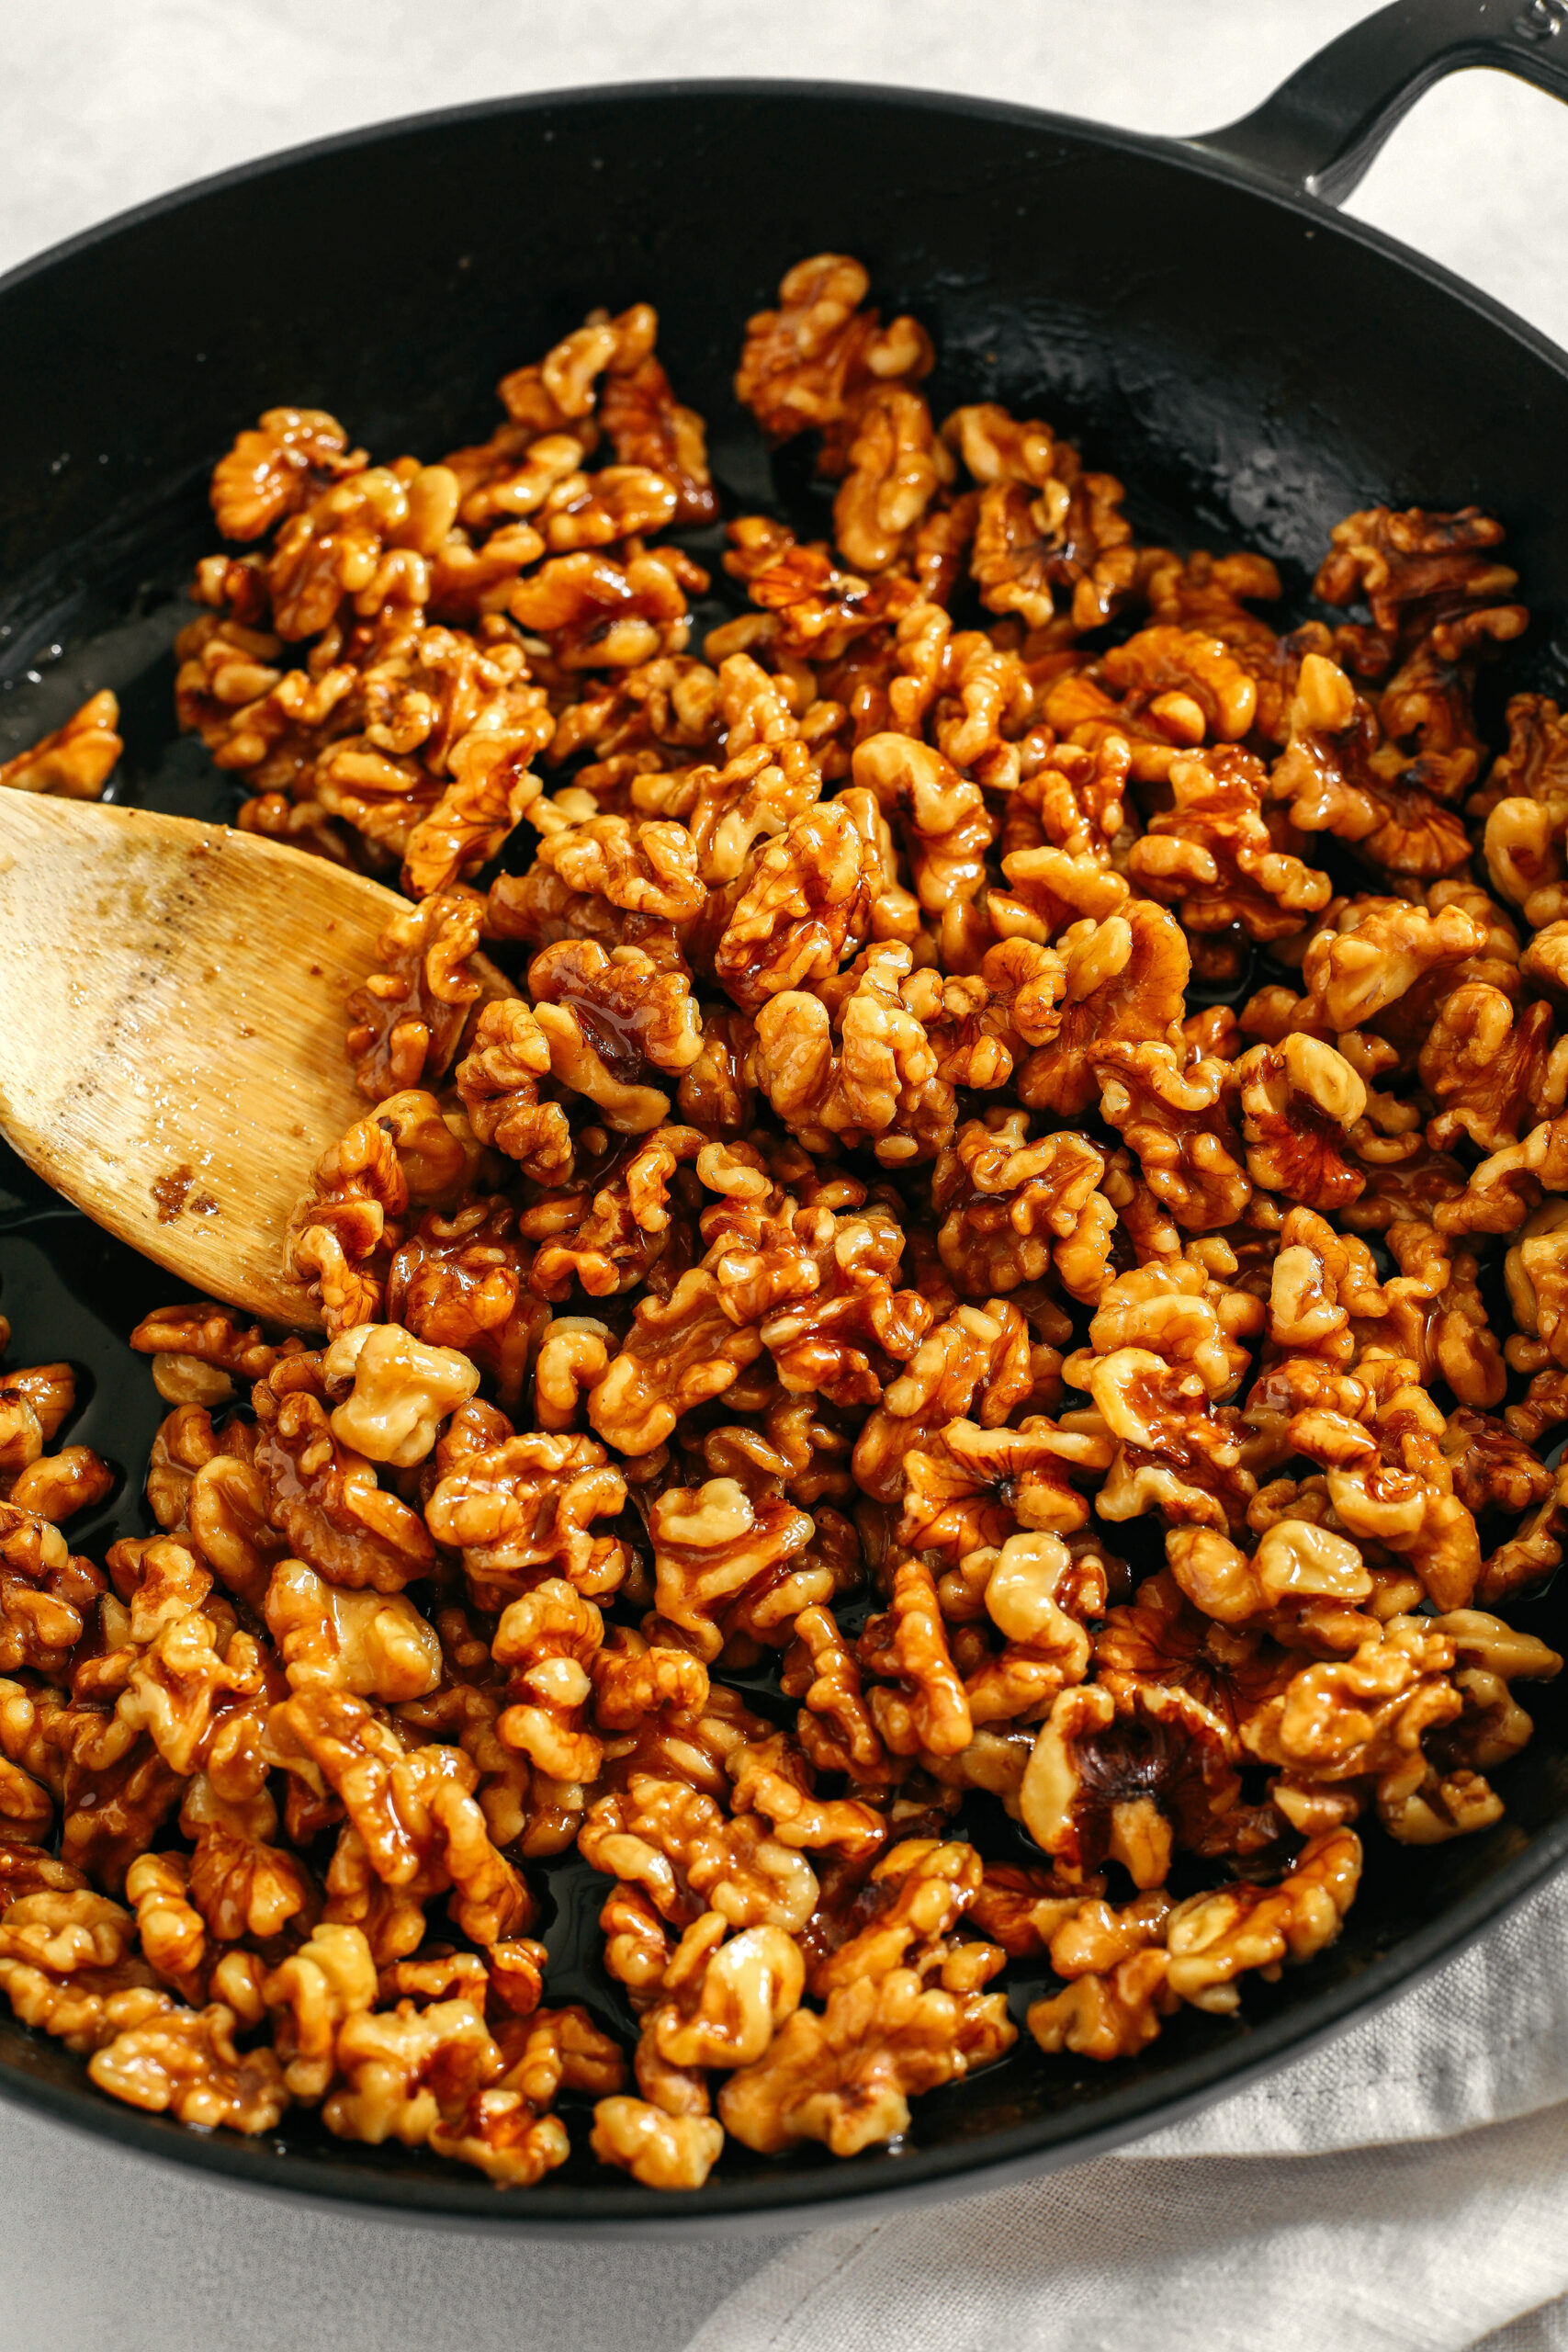 Sweet and crunchy Candied Maple Walnuts easily made in under 10 minutes with only 4 simple ingredients and naturally sweetened with maple syrup, vanilla and cinnamon!  The perfect addition to salads, cheeseboards, desserts or enjoy as a delicious snack!